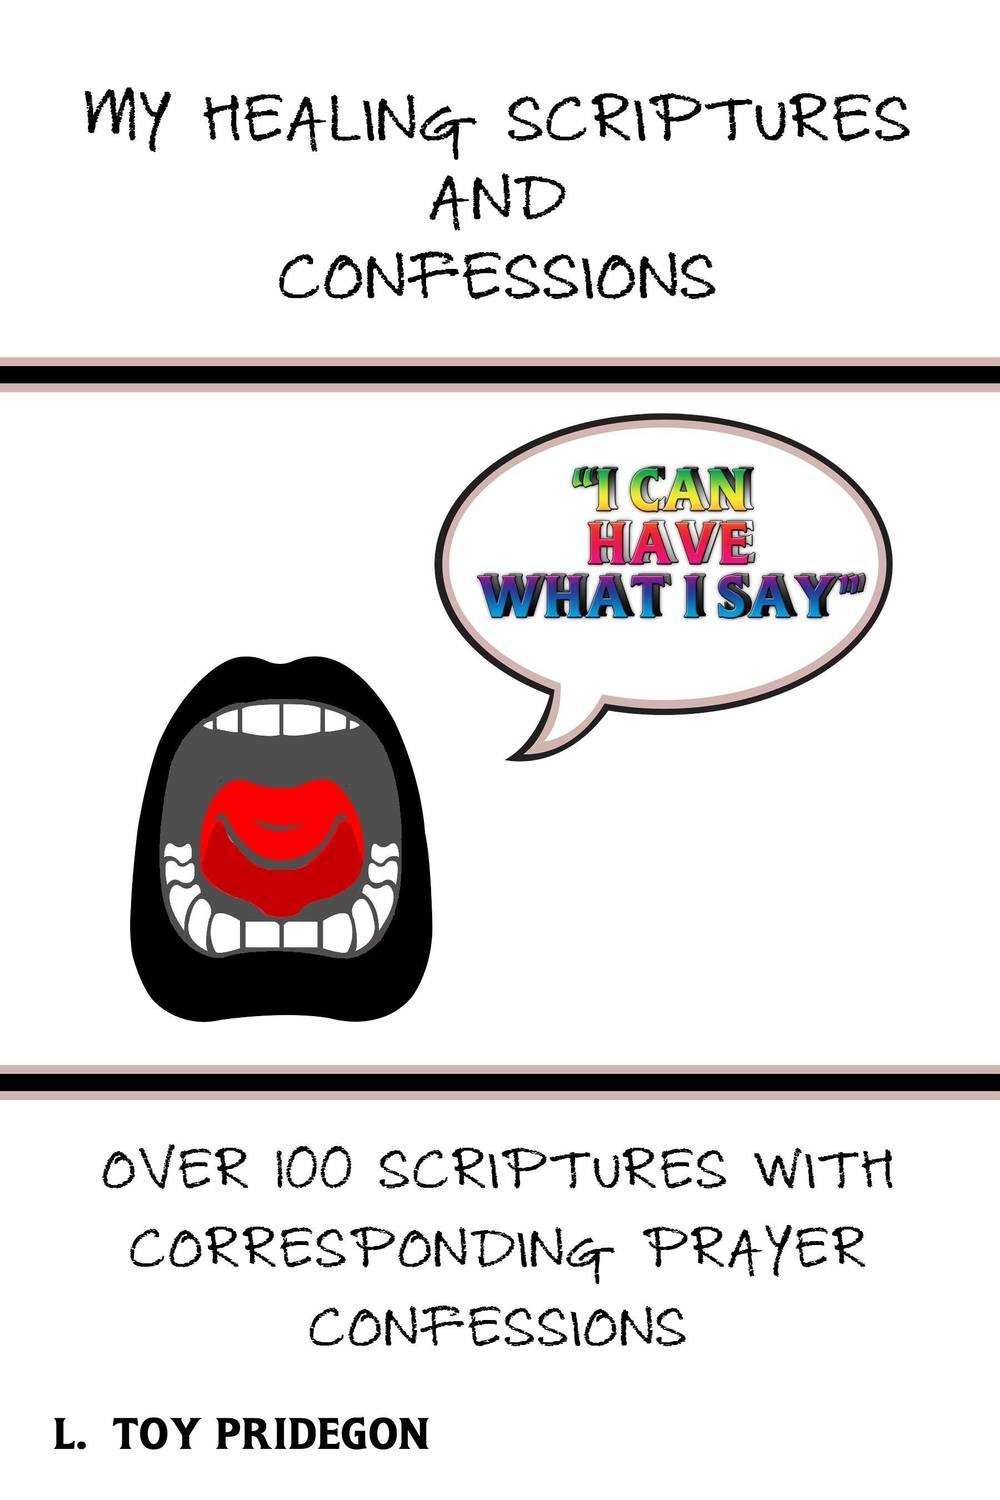 My Healing Scriptures and Confessions